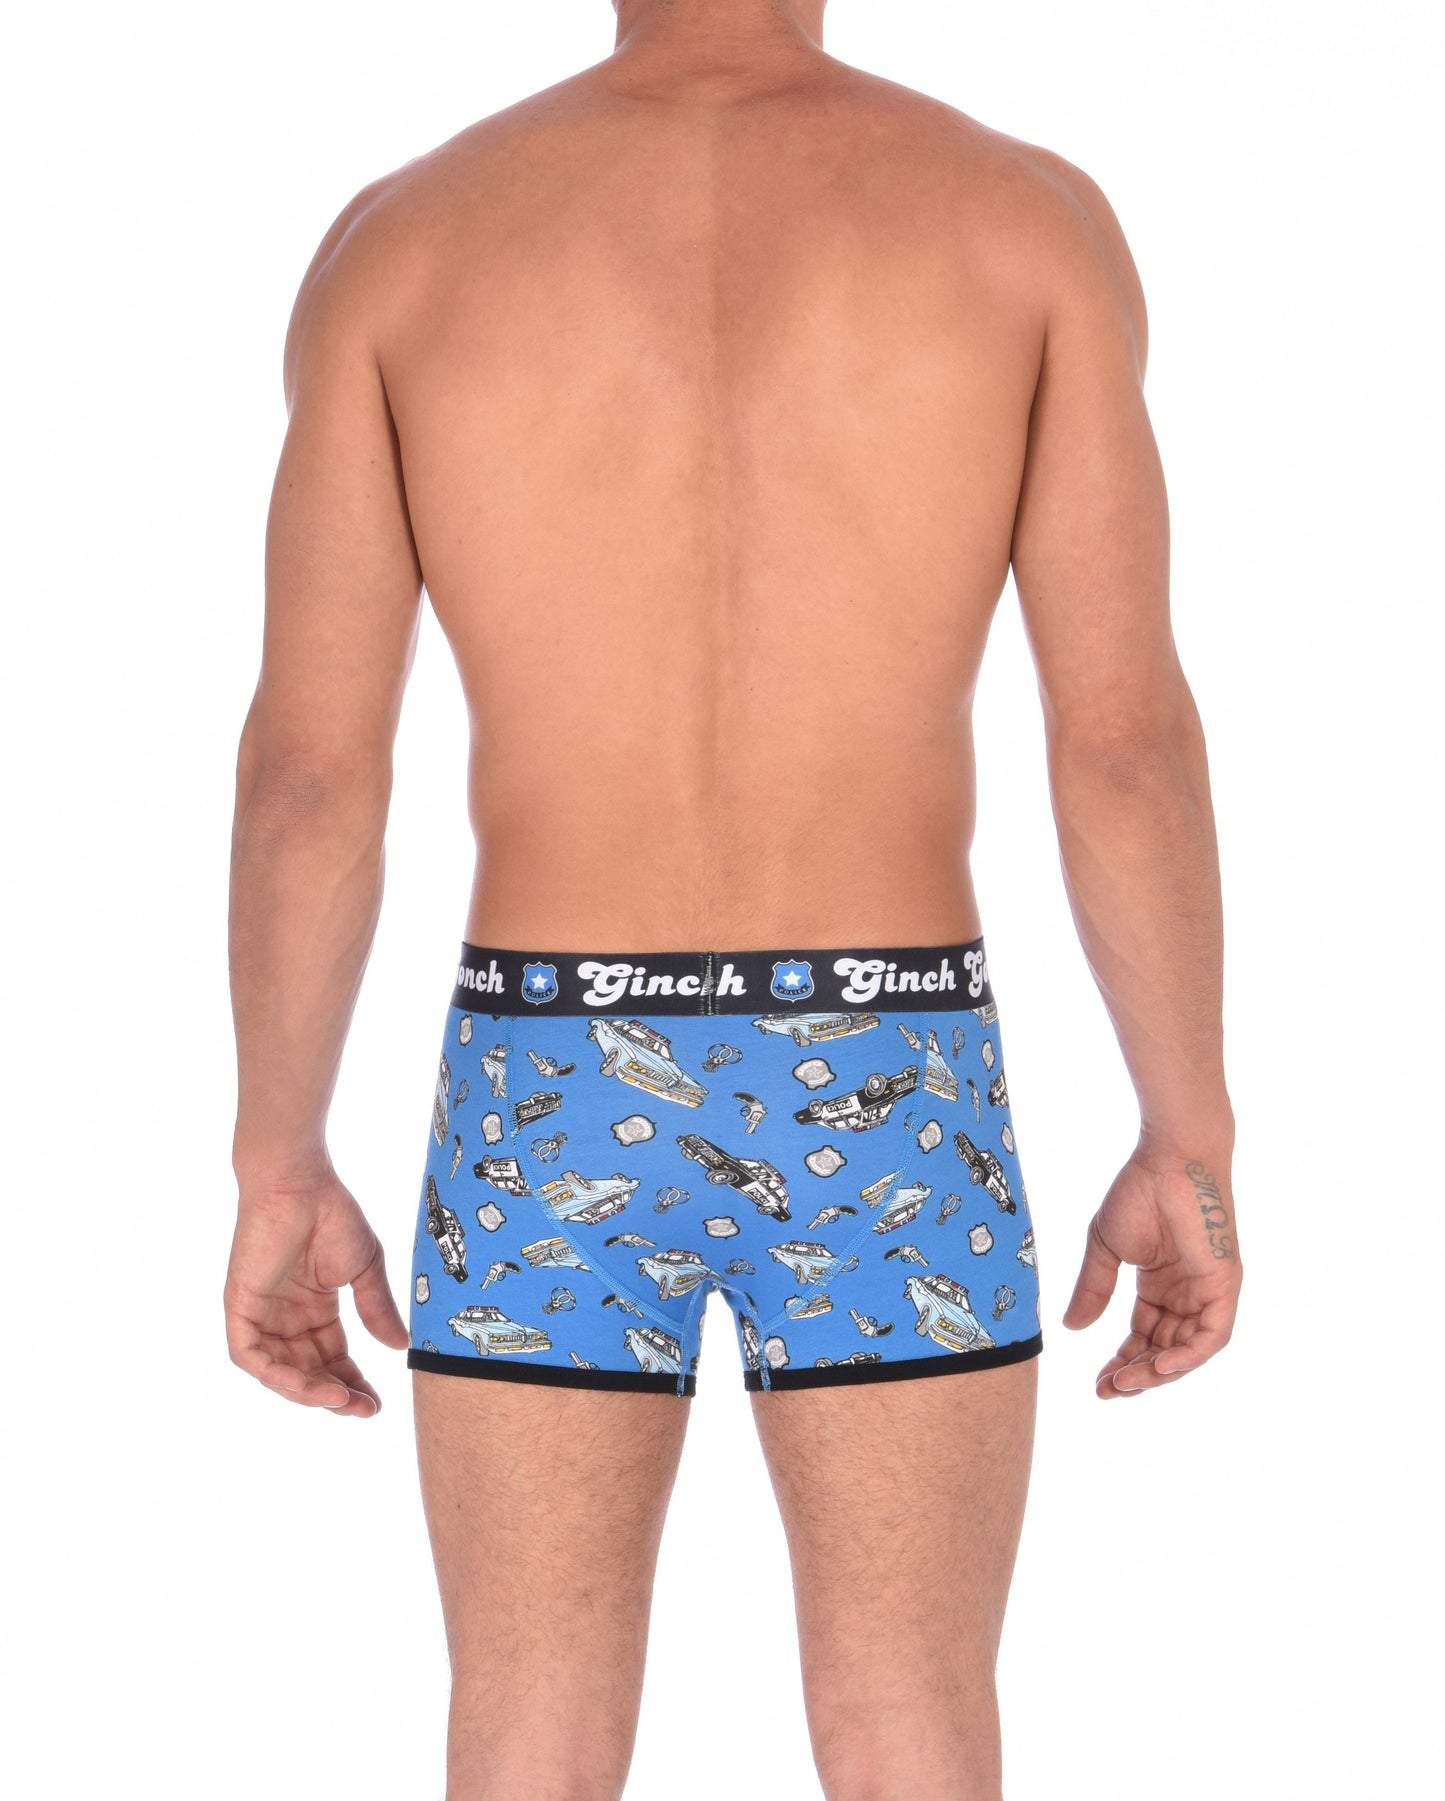 Ginch GonchGG Patrol Boxer Brief trunk men's underwear blue fabric with cop cars, badges, hand cuffs, and guns. Black trim and black printed waistband back